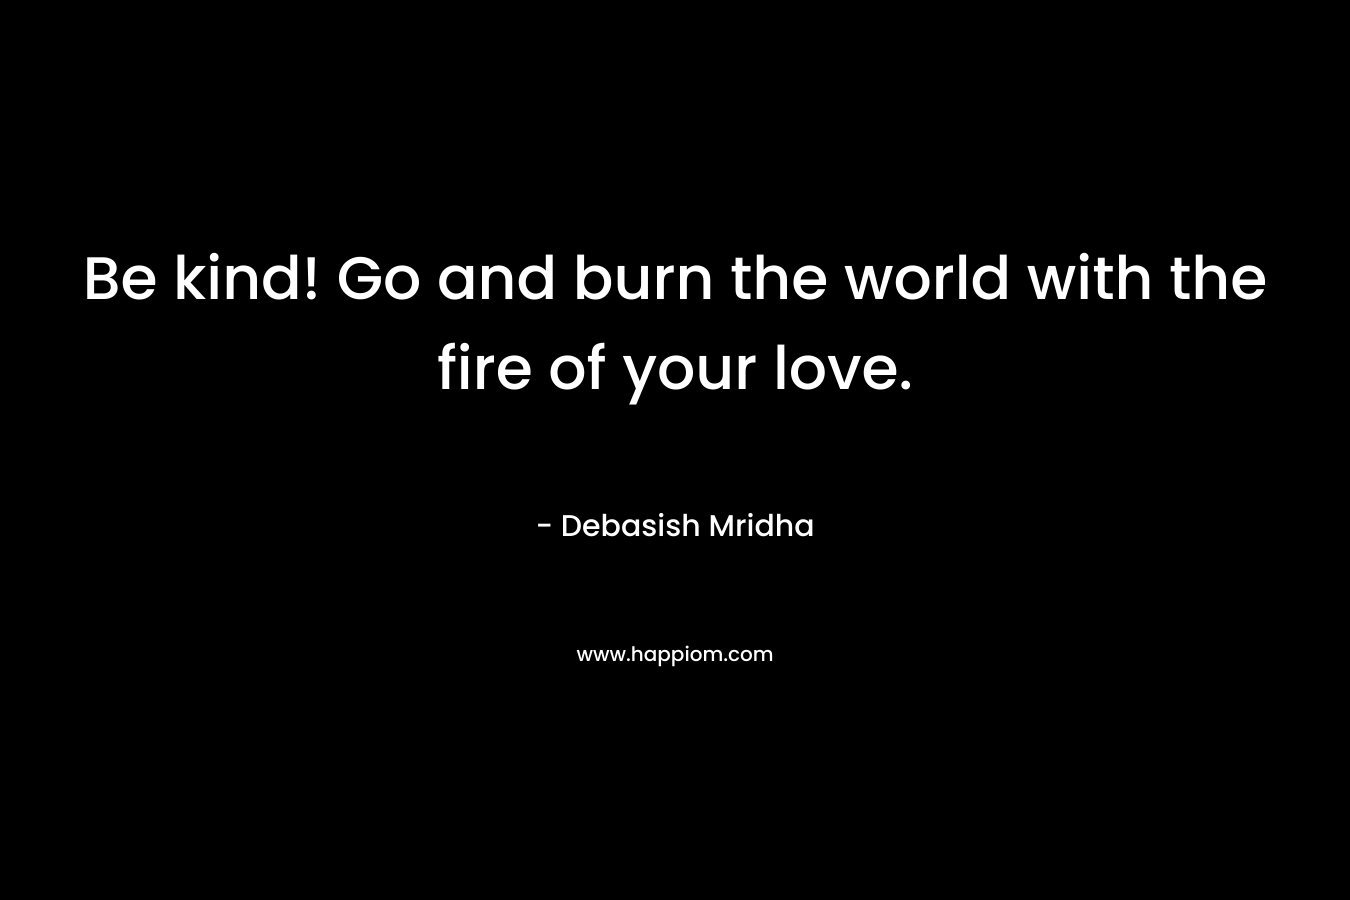 Be kind! Go and burn the world with the fire of your love. – Debasish Mridha